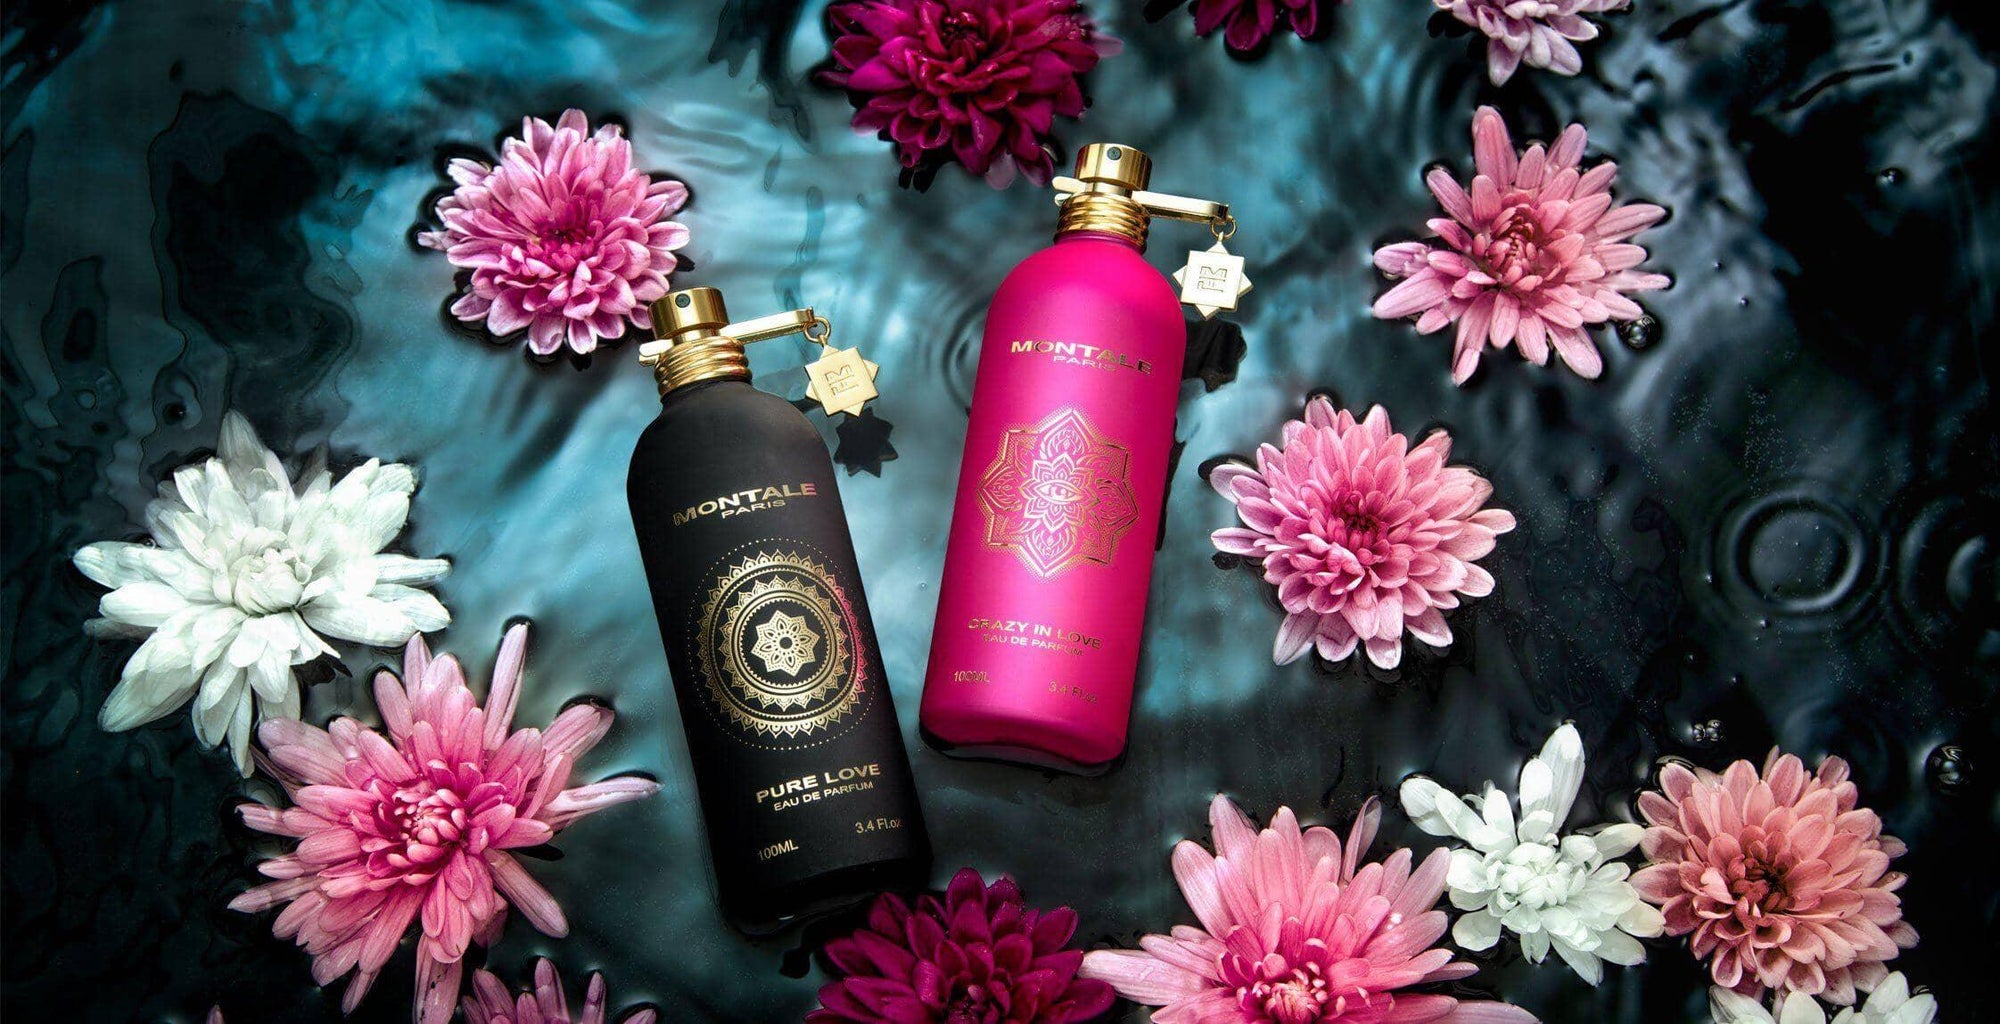 Montale Love Collection - Crazy In Love & Pure Love - Skin / Scent